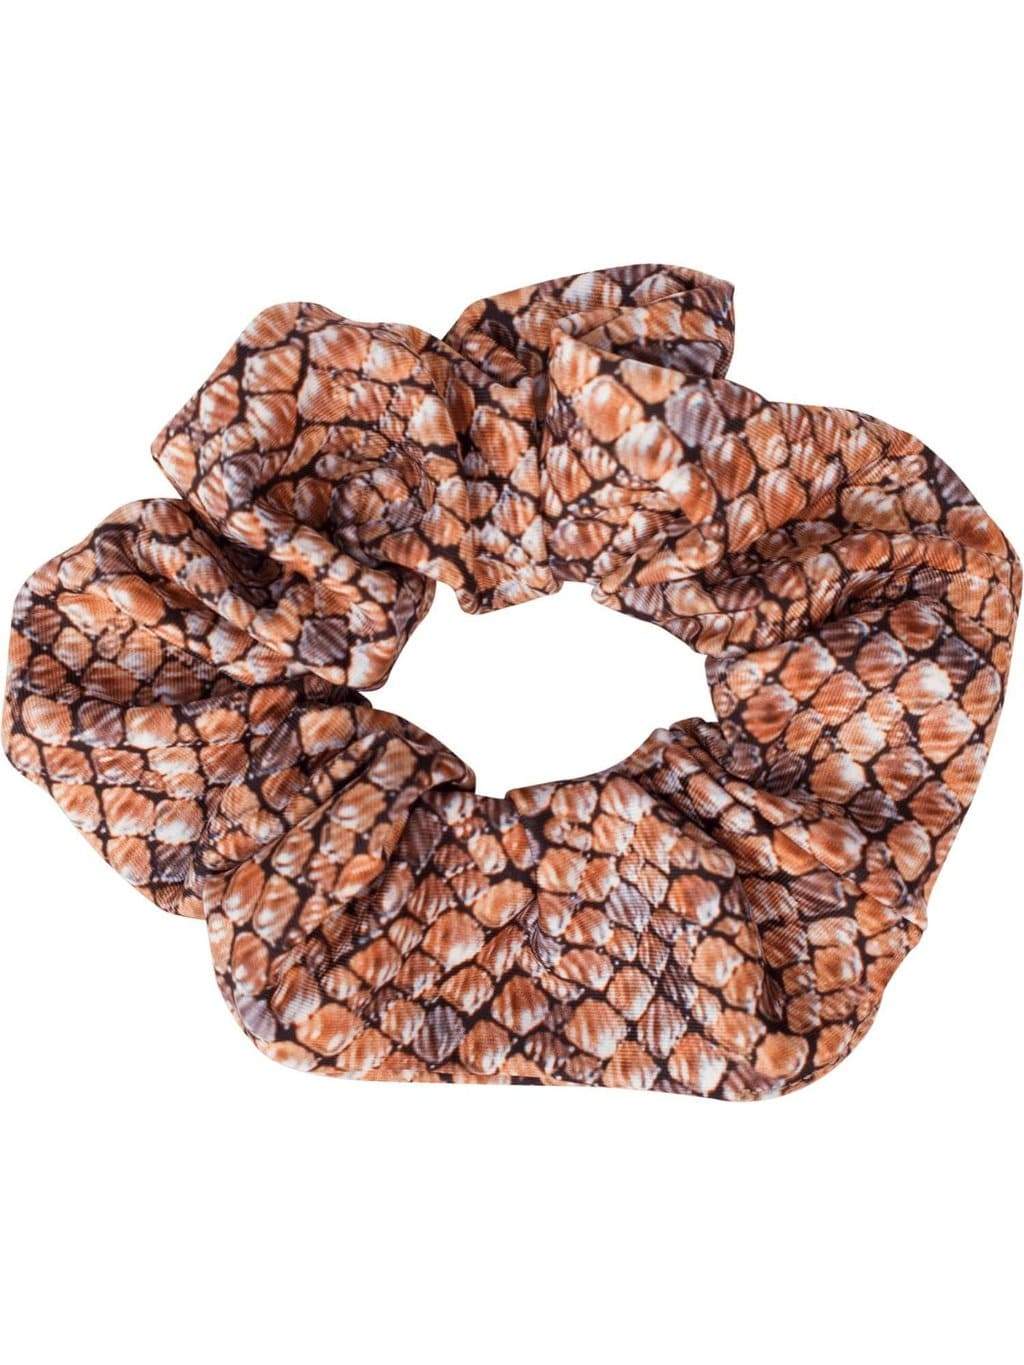 Waterlust Recycled Scrunchie Made From Pre-Consumer Waste Nurse Shark Nirvana